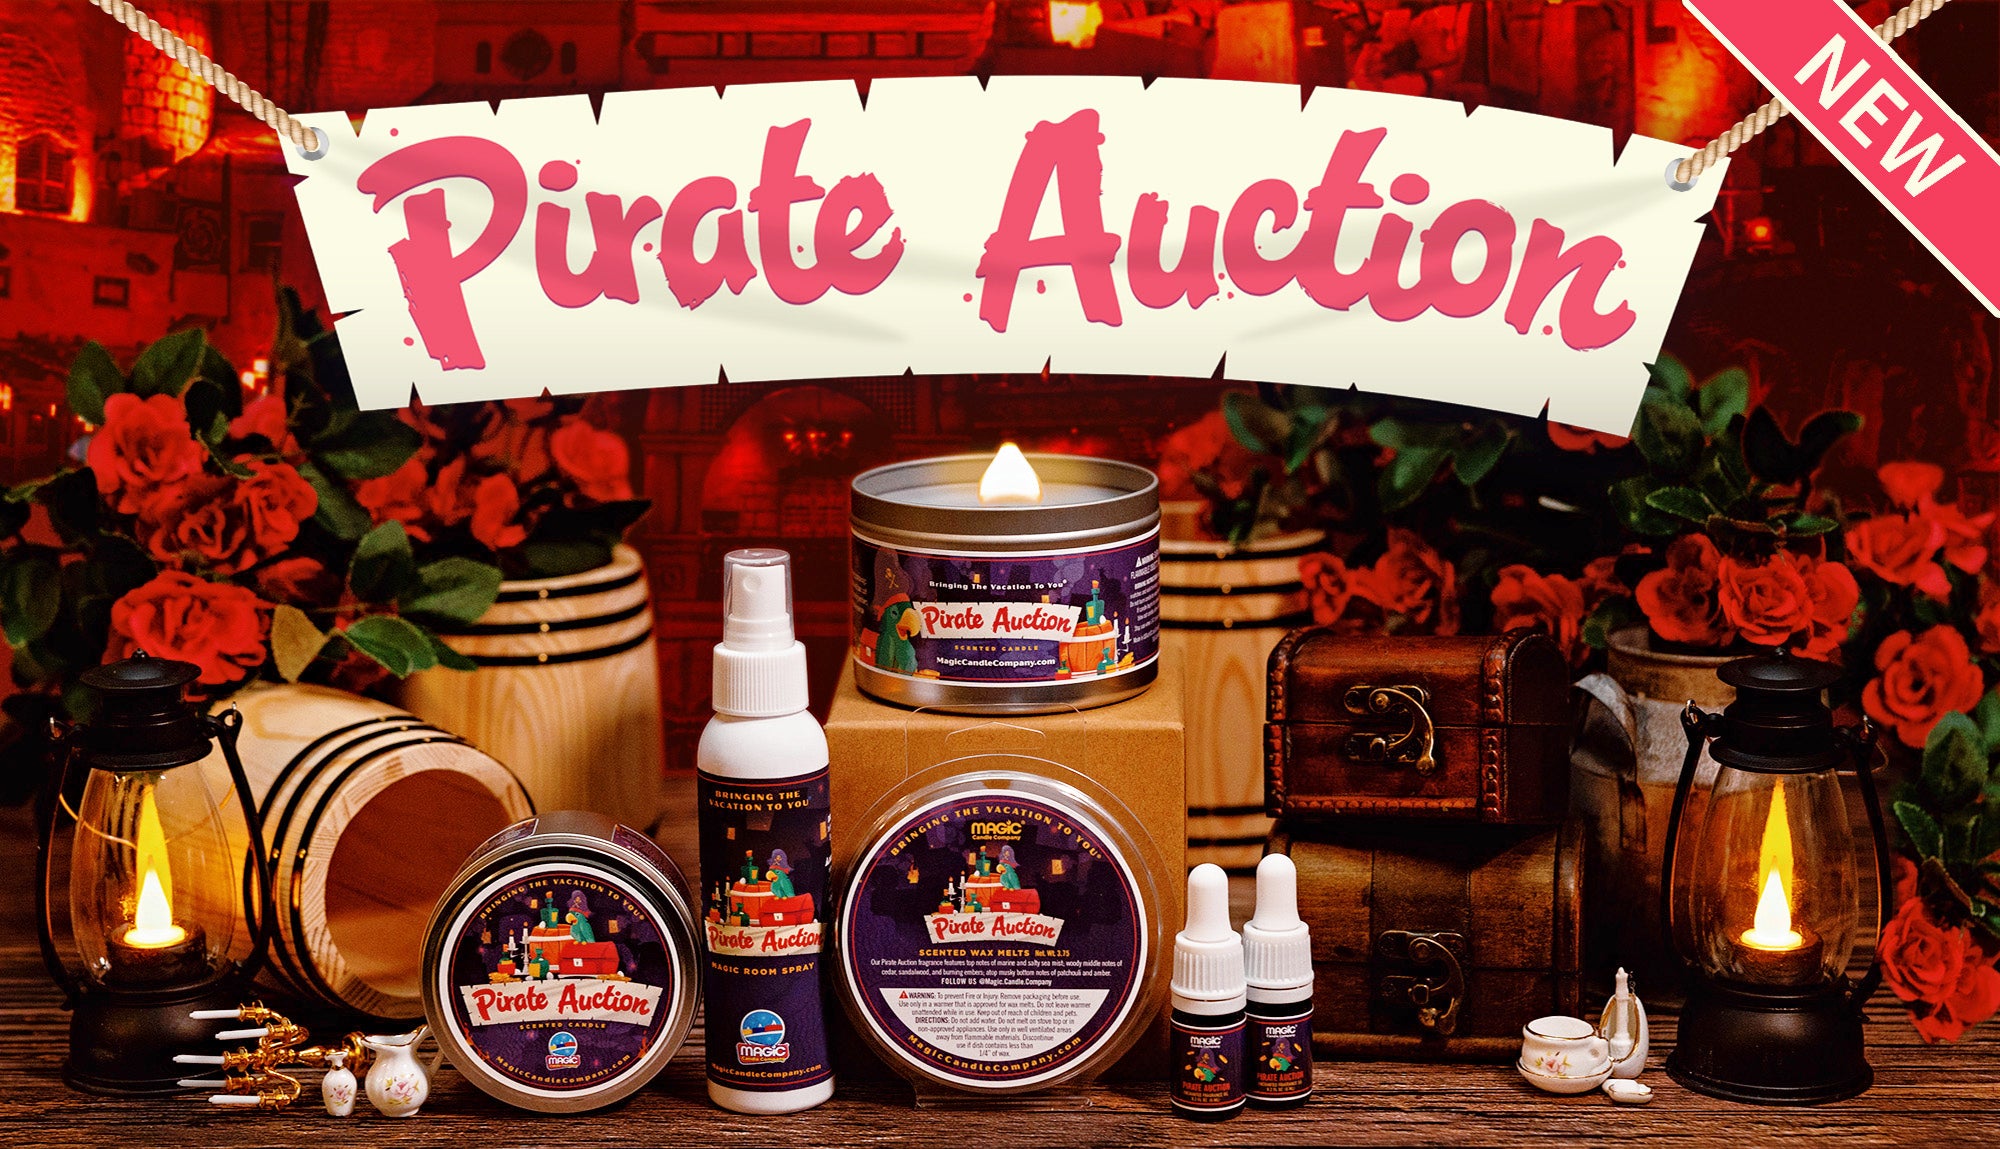 Pirate Auction fragrance